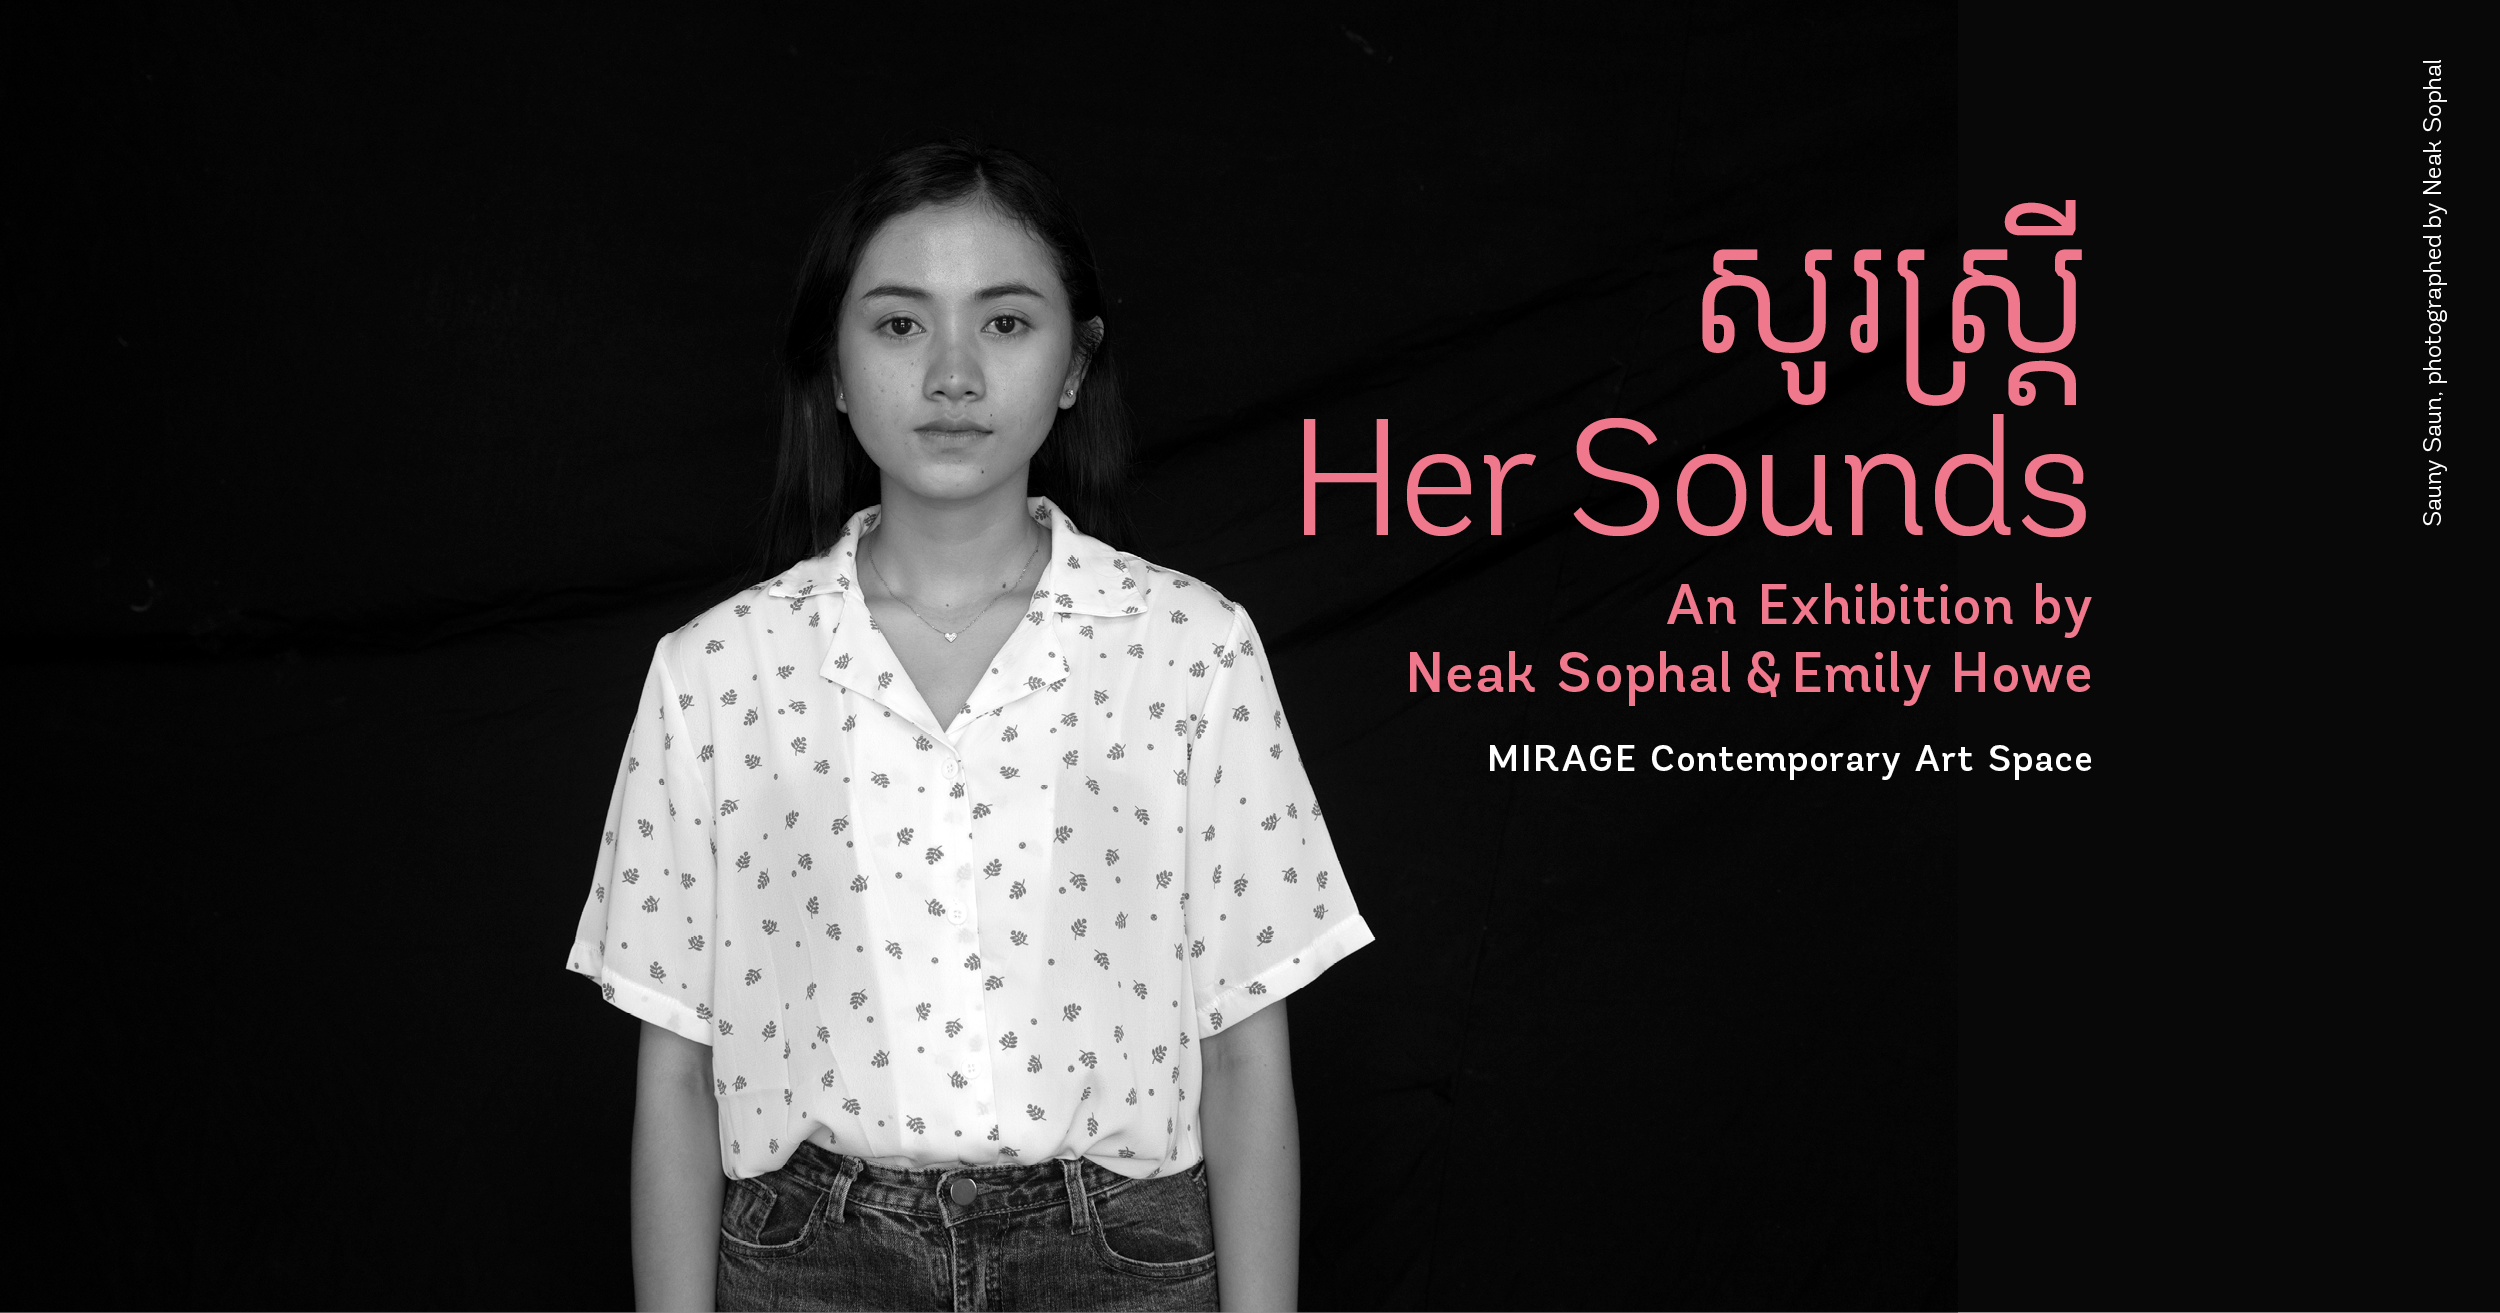 Neak Sophal and Emily Howe at MIRAGE Contemporary Art Space in Siem Reap, Cambodia